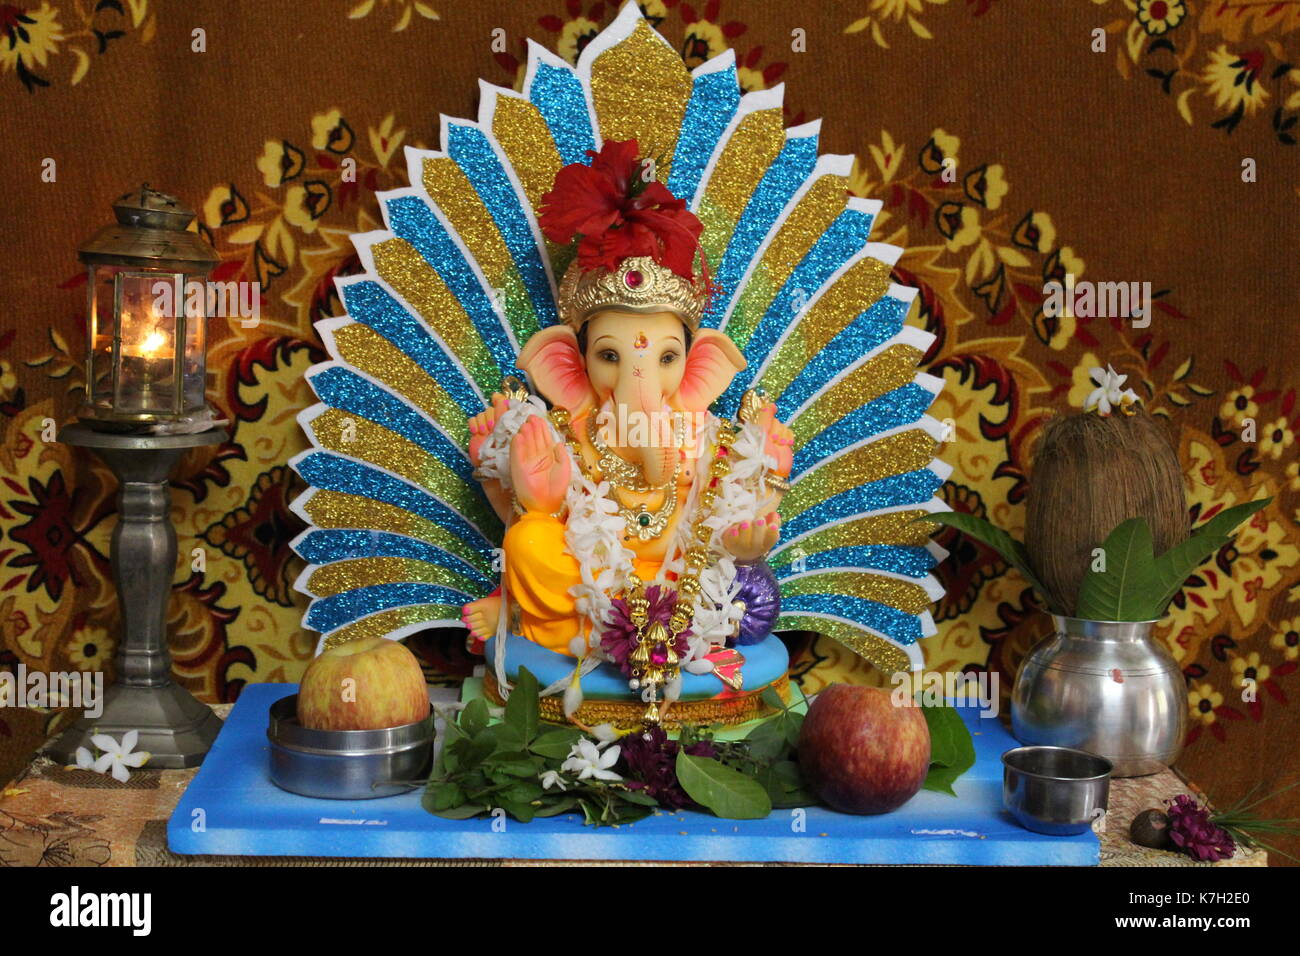 An home Idol of Lord Ganesha along with the decorations during 10 days Ganesh Festival celebrated in Maharashtra, India. Stock Photo